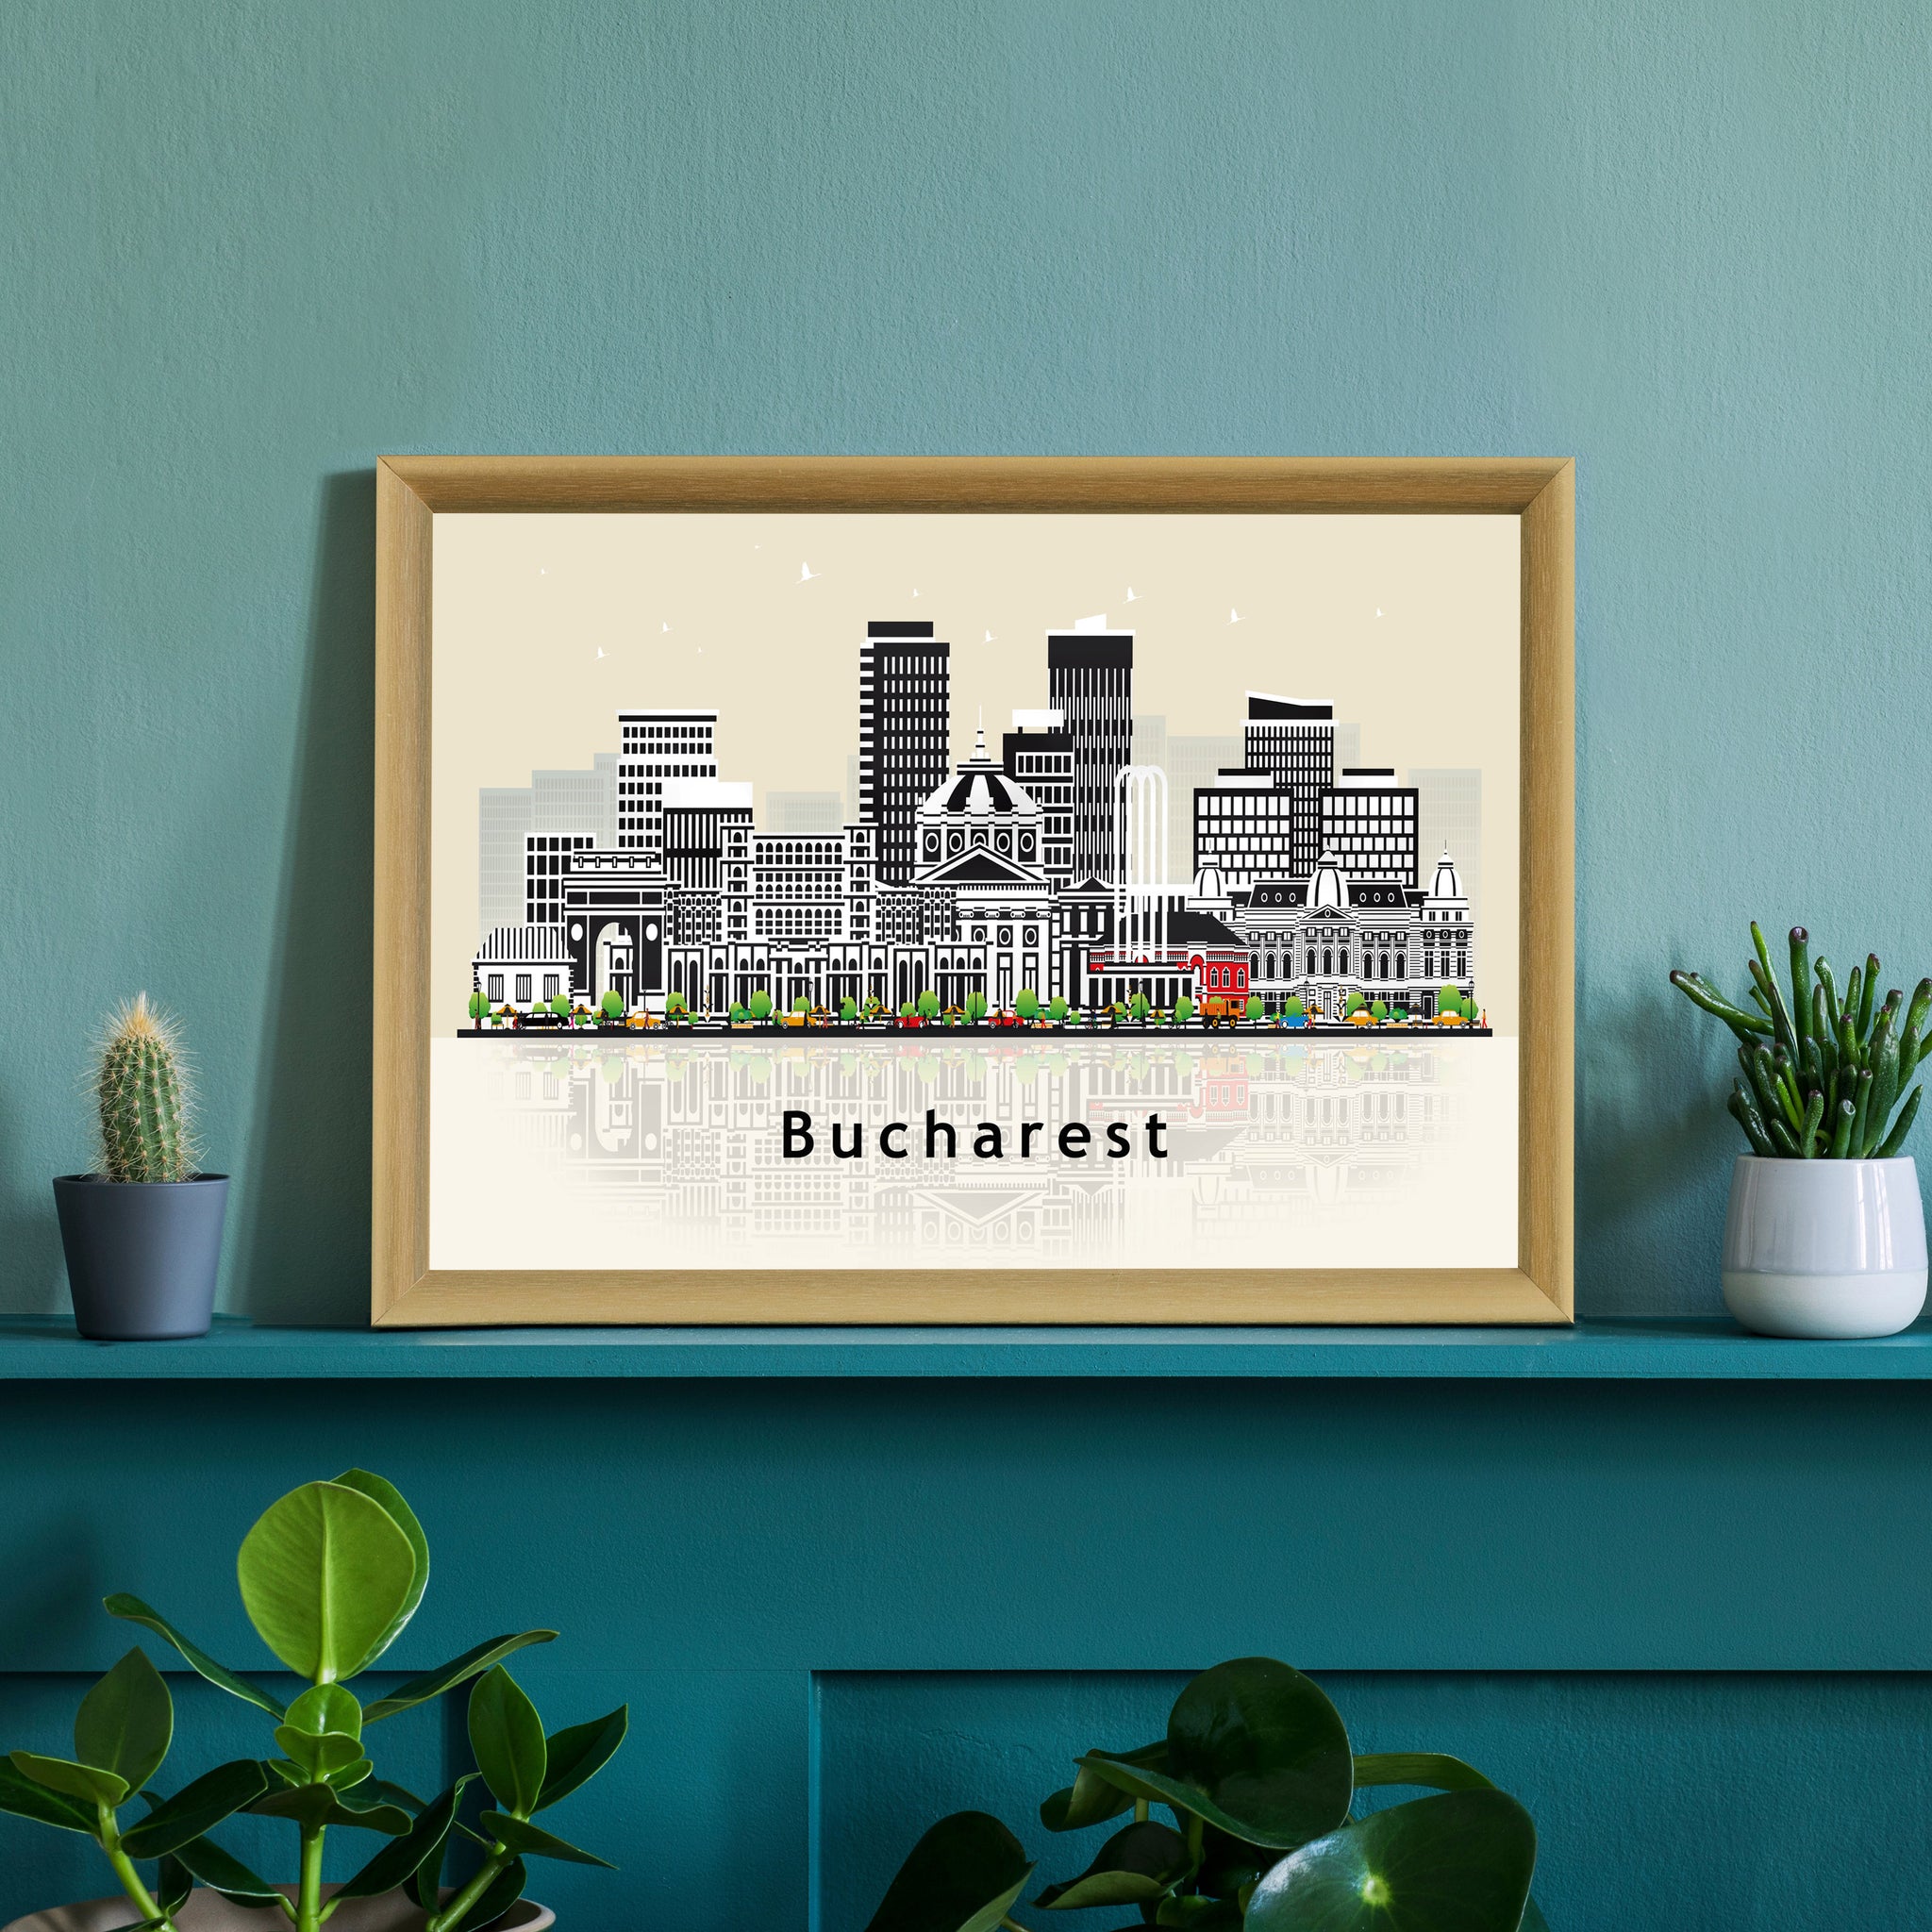 BUCHAREST ROMANIA Illustration skyline poster, Modern skyline cityscape poster print, Romania landmark map poster, Home wall decoration